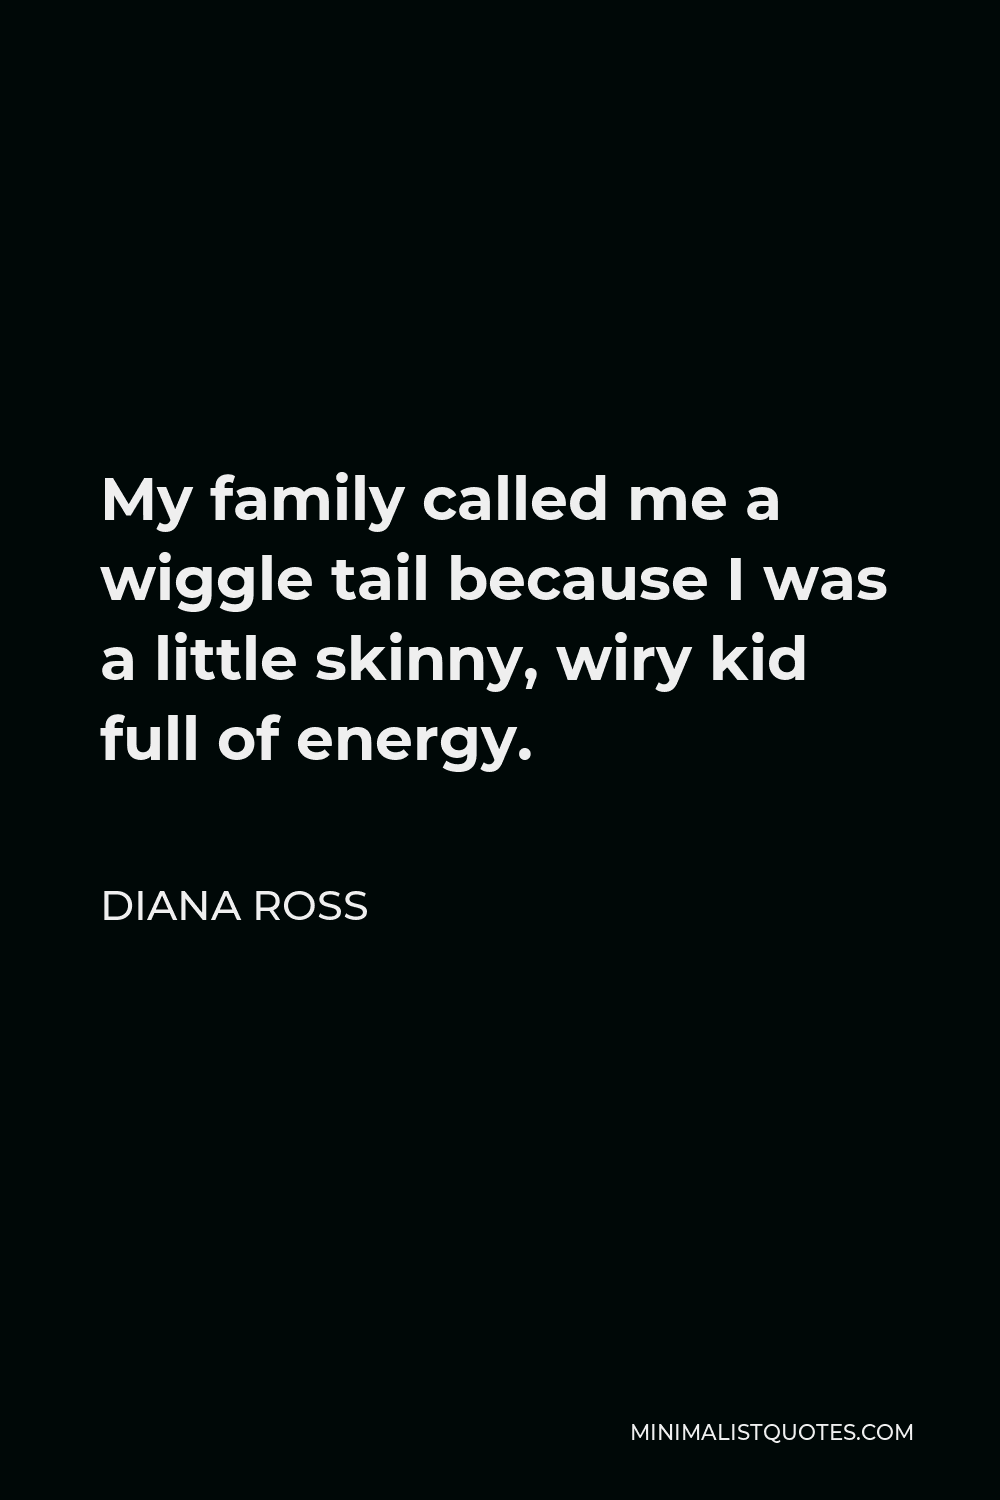 Diana Ross Quote - My family called me a wiggle tail because I was a little skinny, wiry kid full of energy.